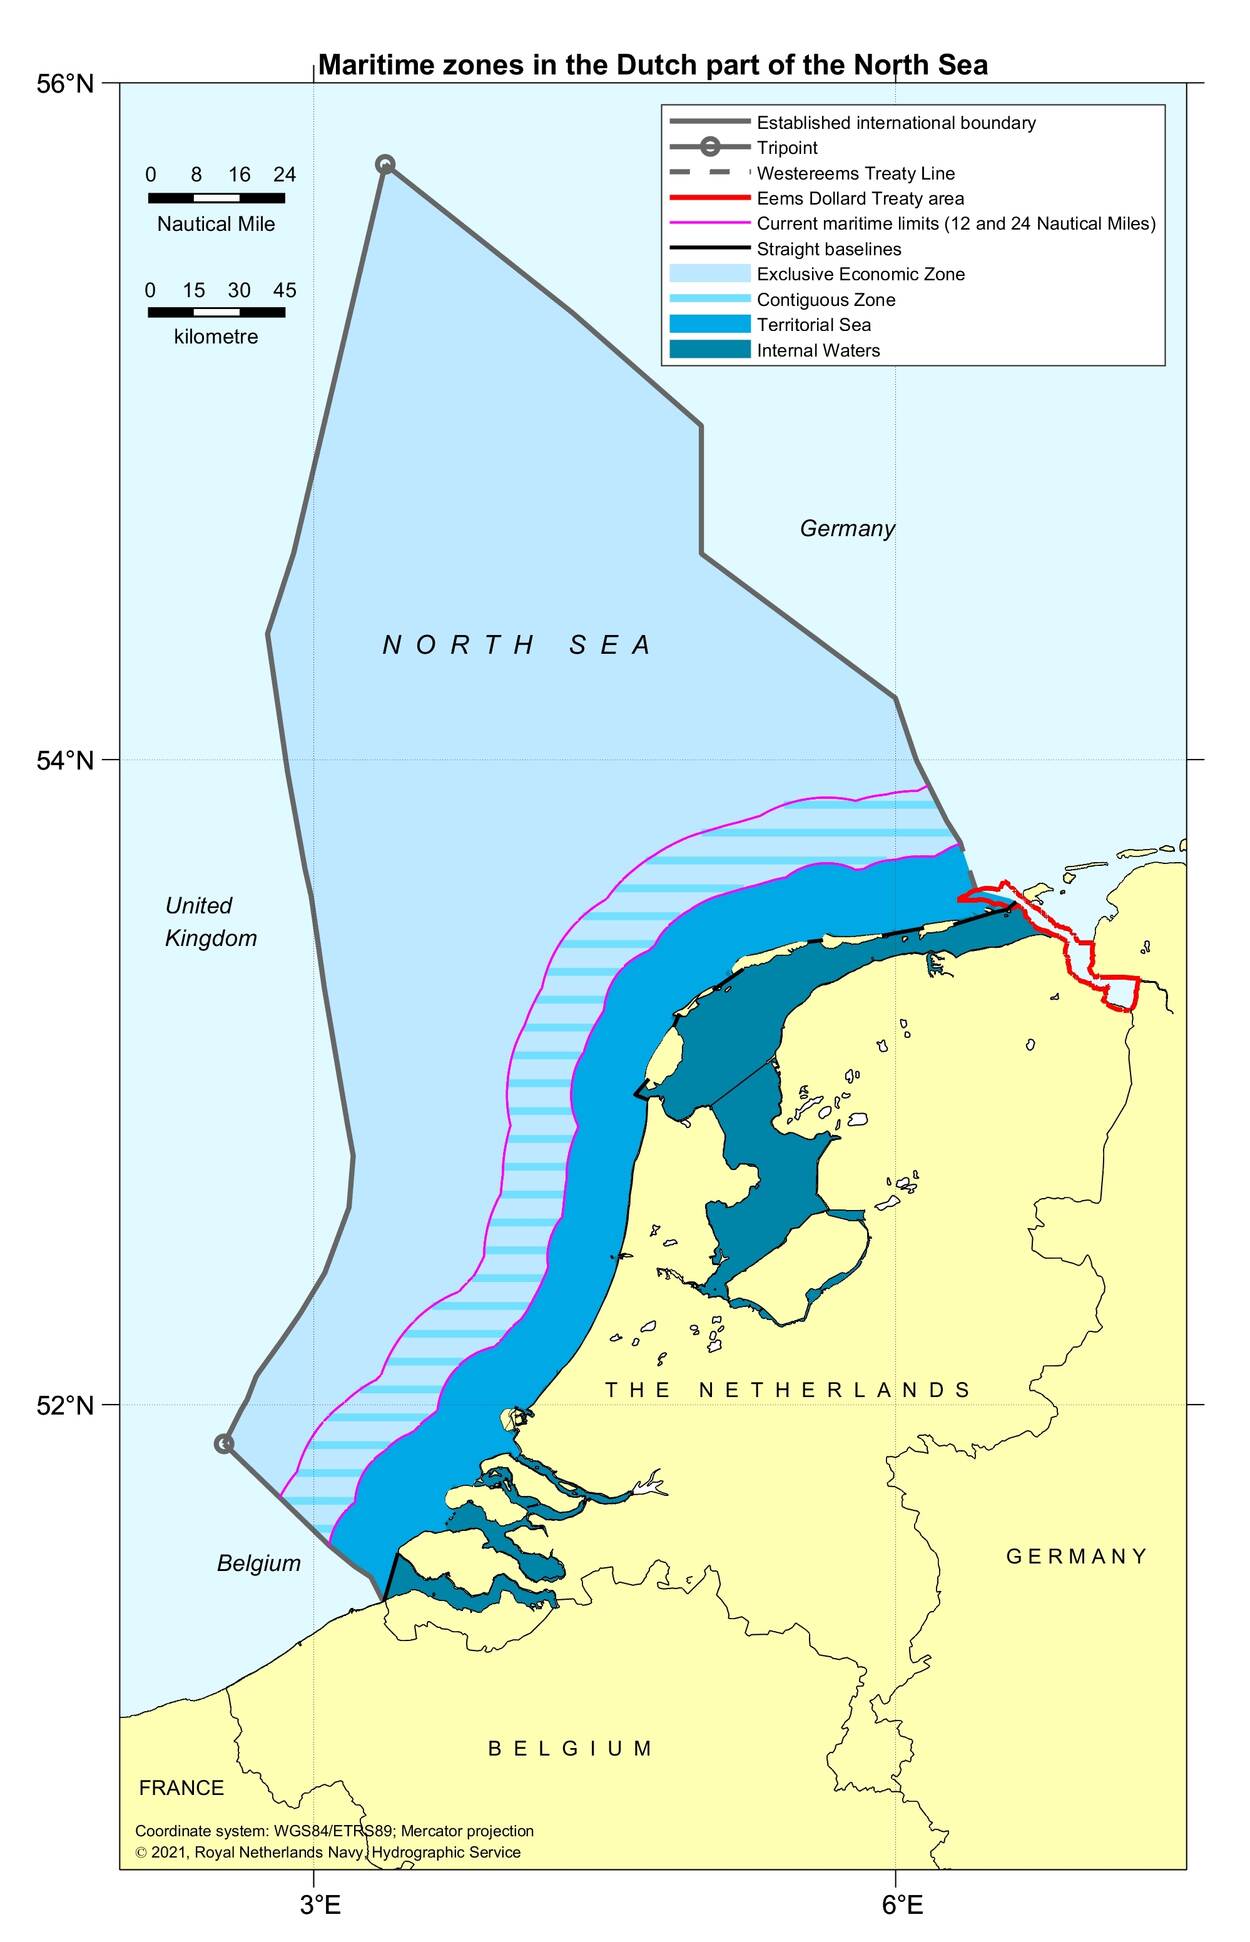 Netherlands maritime claims about outer limits of the territorial sea